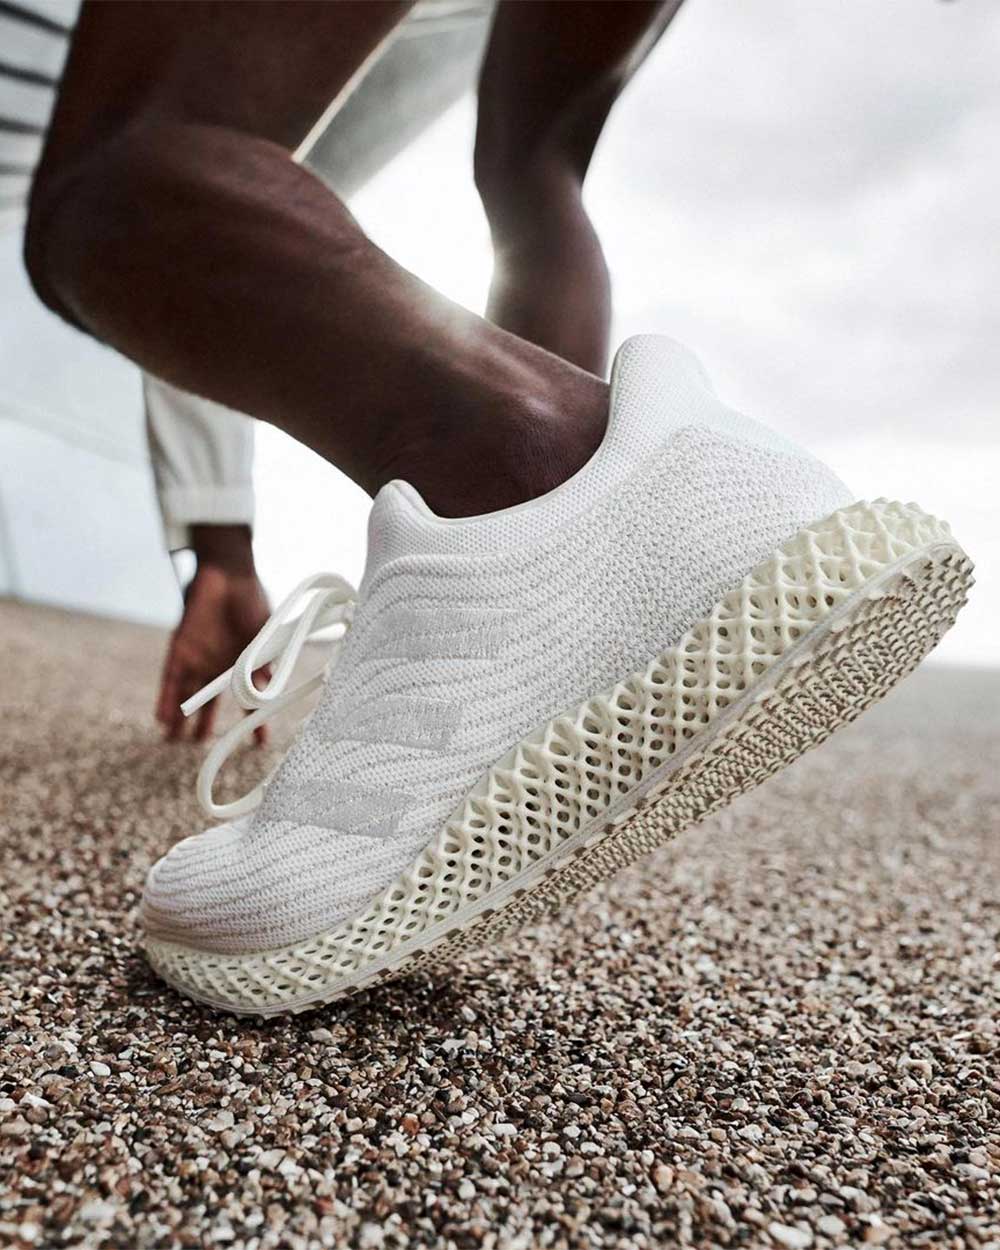 Adidas X Parley sustainable sneakers